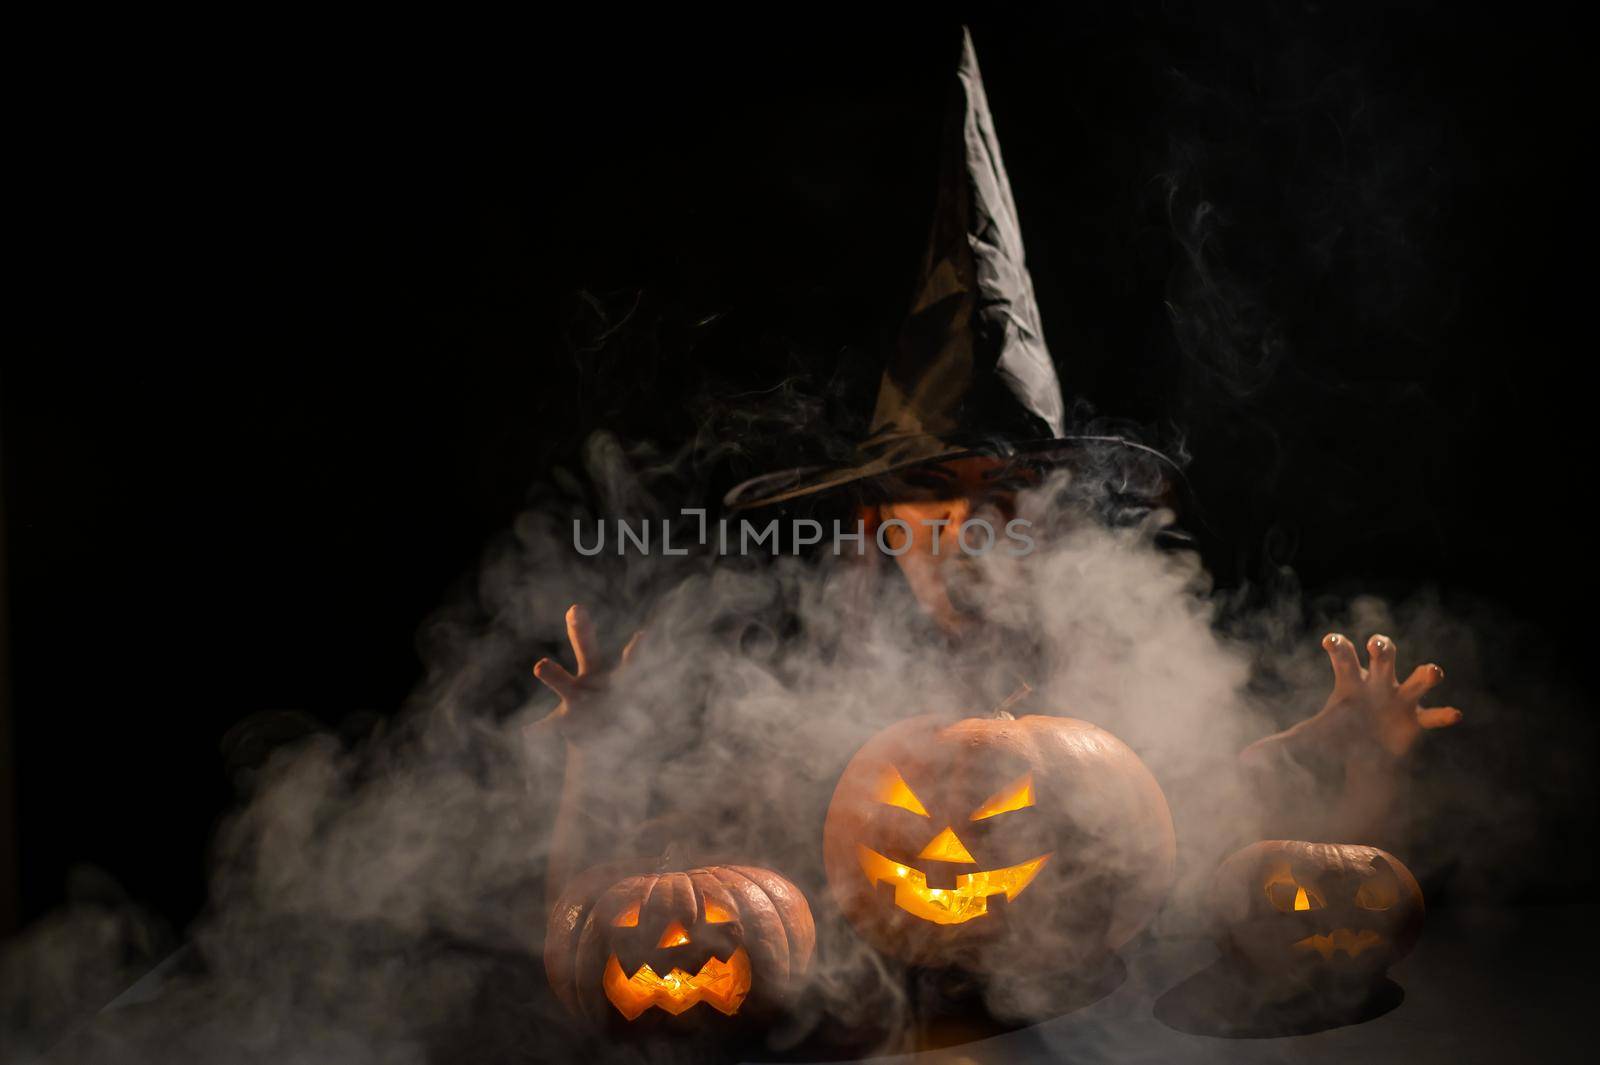 The evil witch casts a spell on pumpkins. Portrait of a woman in a carnival halloween costume in the dark.